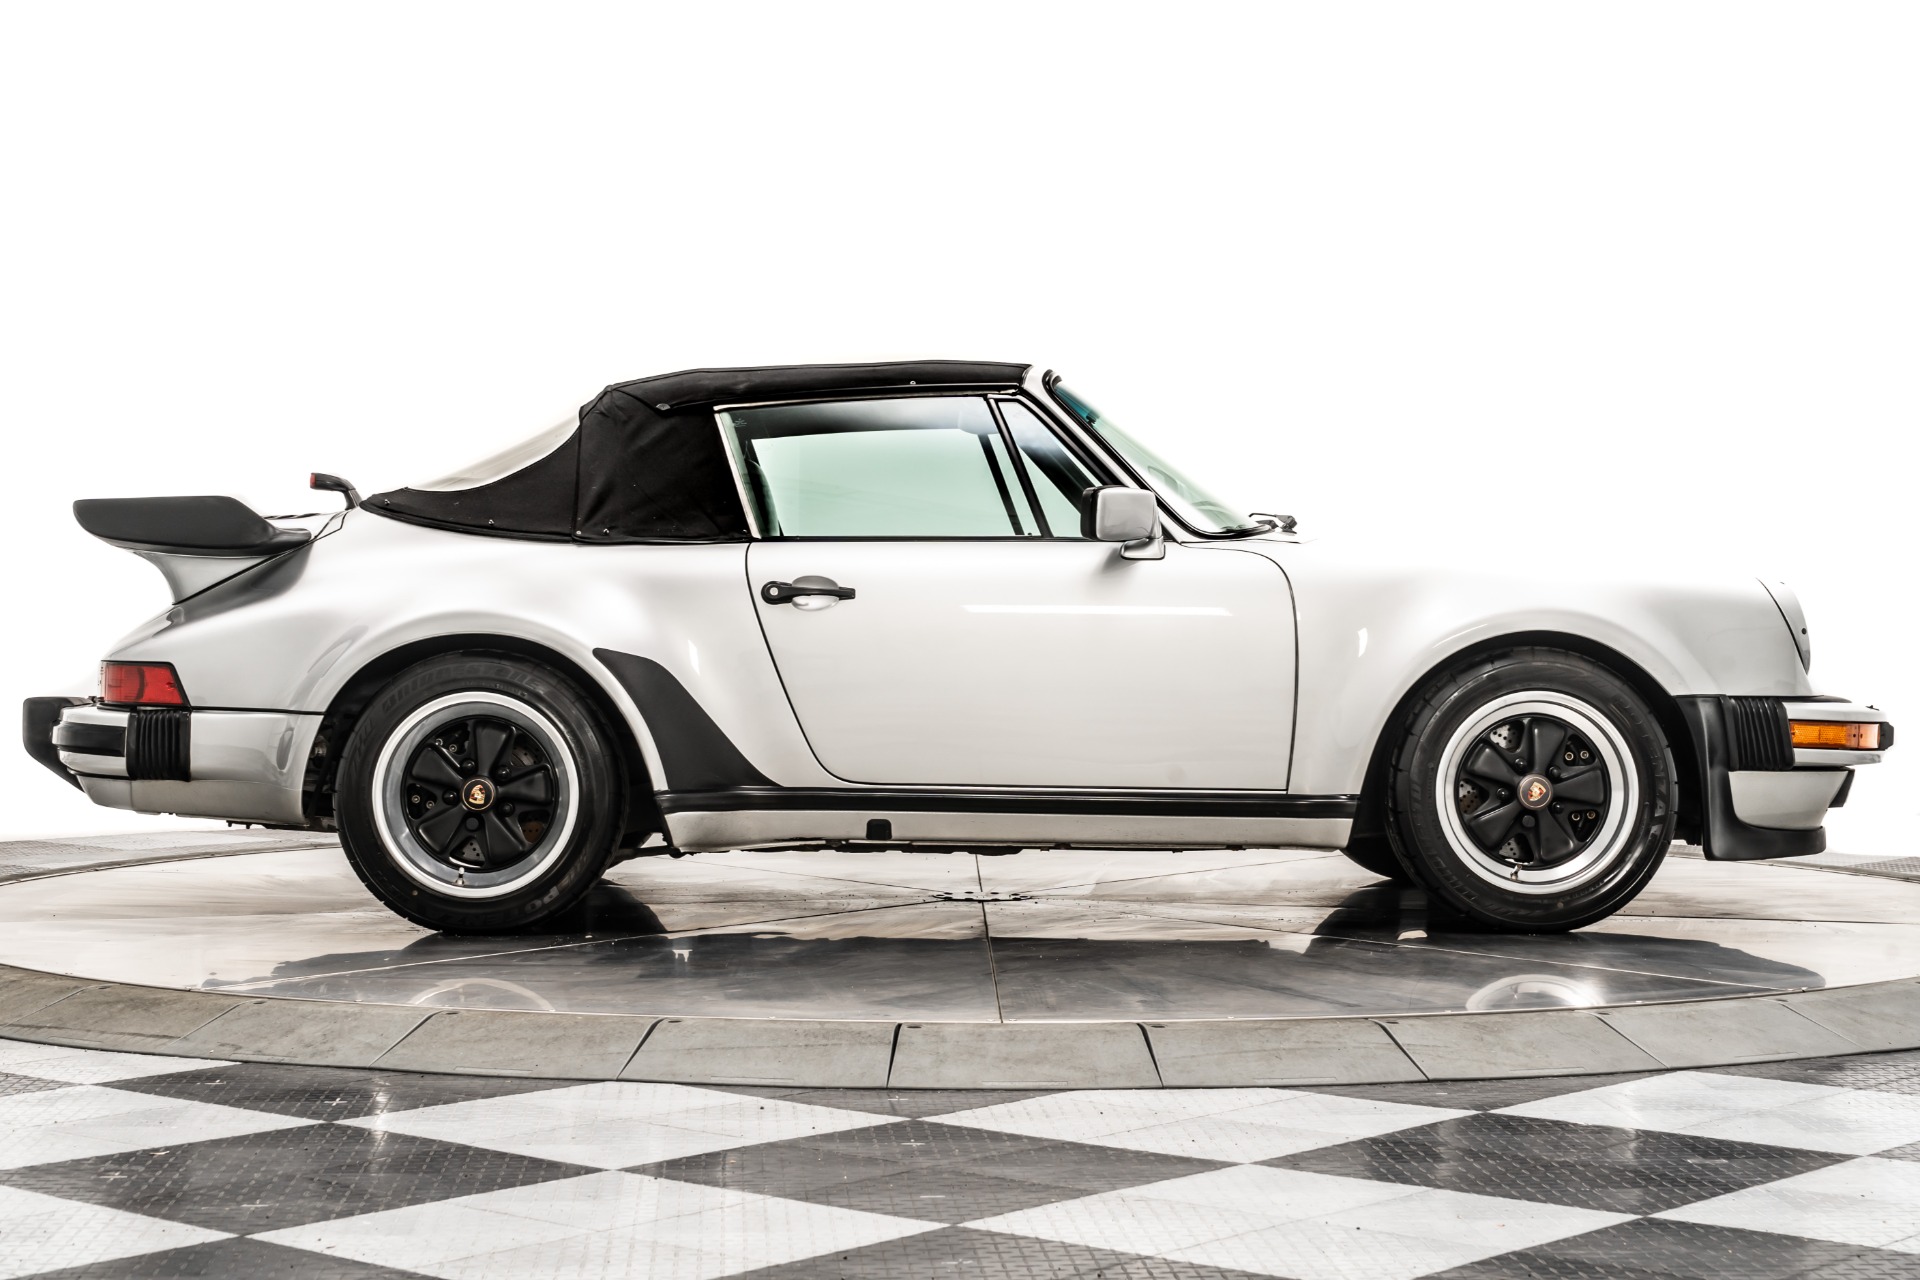 Used 1986 Porsche 911 Carrera Turbo Look Cabriolet For Sale (Sold)